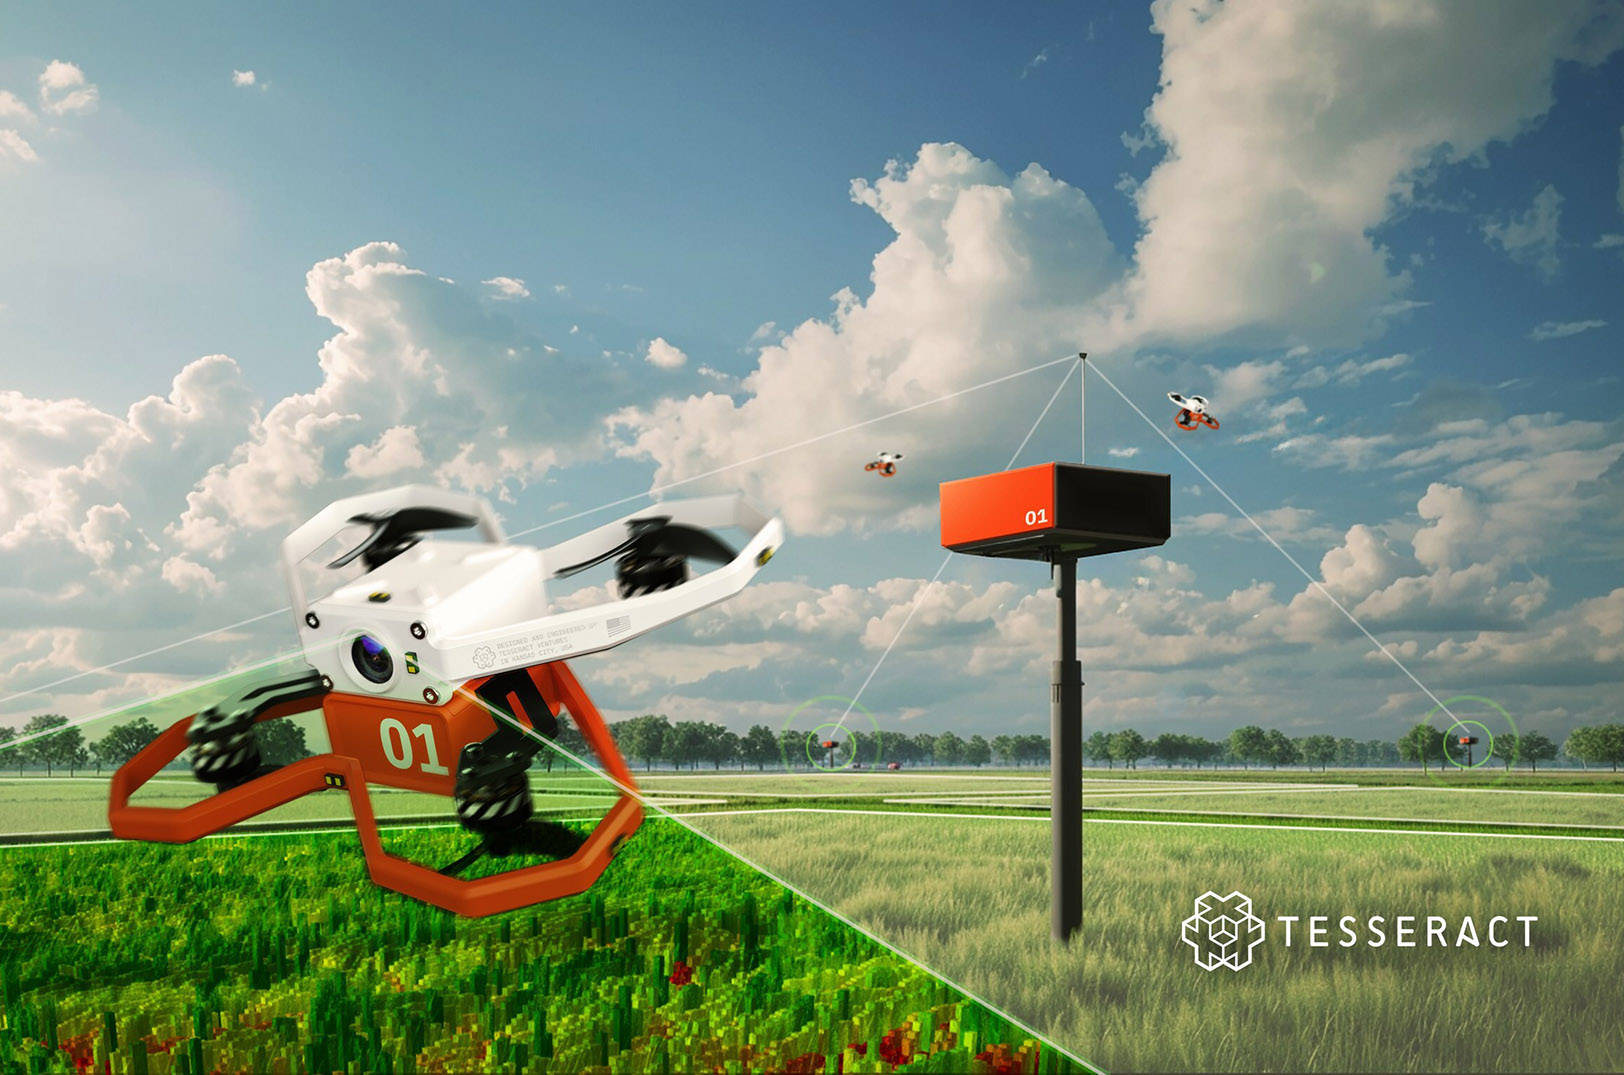 Tesseract cultivates military drone tech for ag use; targeting American farmer impact [Video]